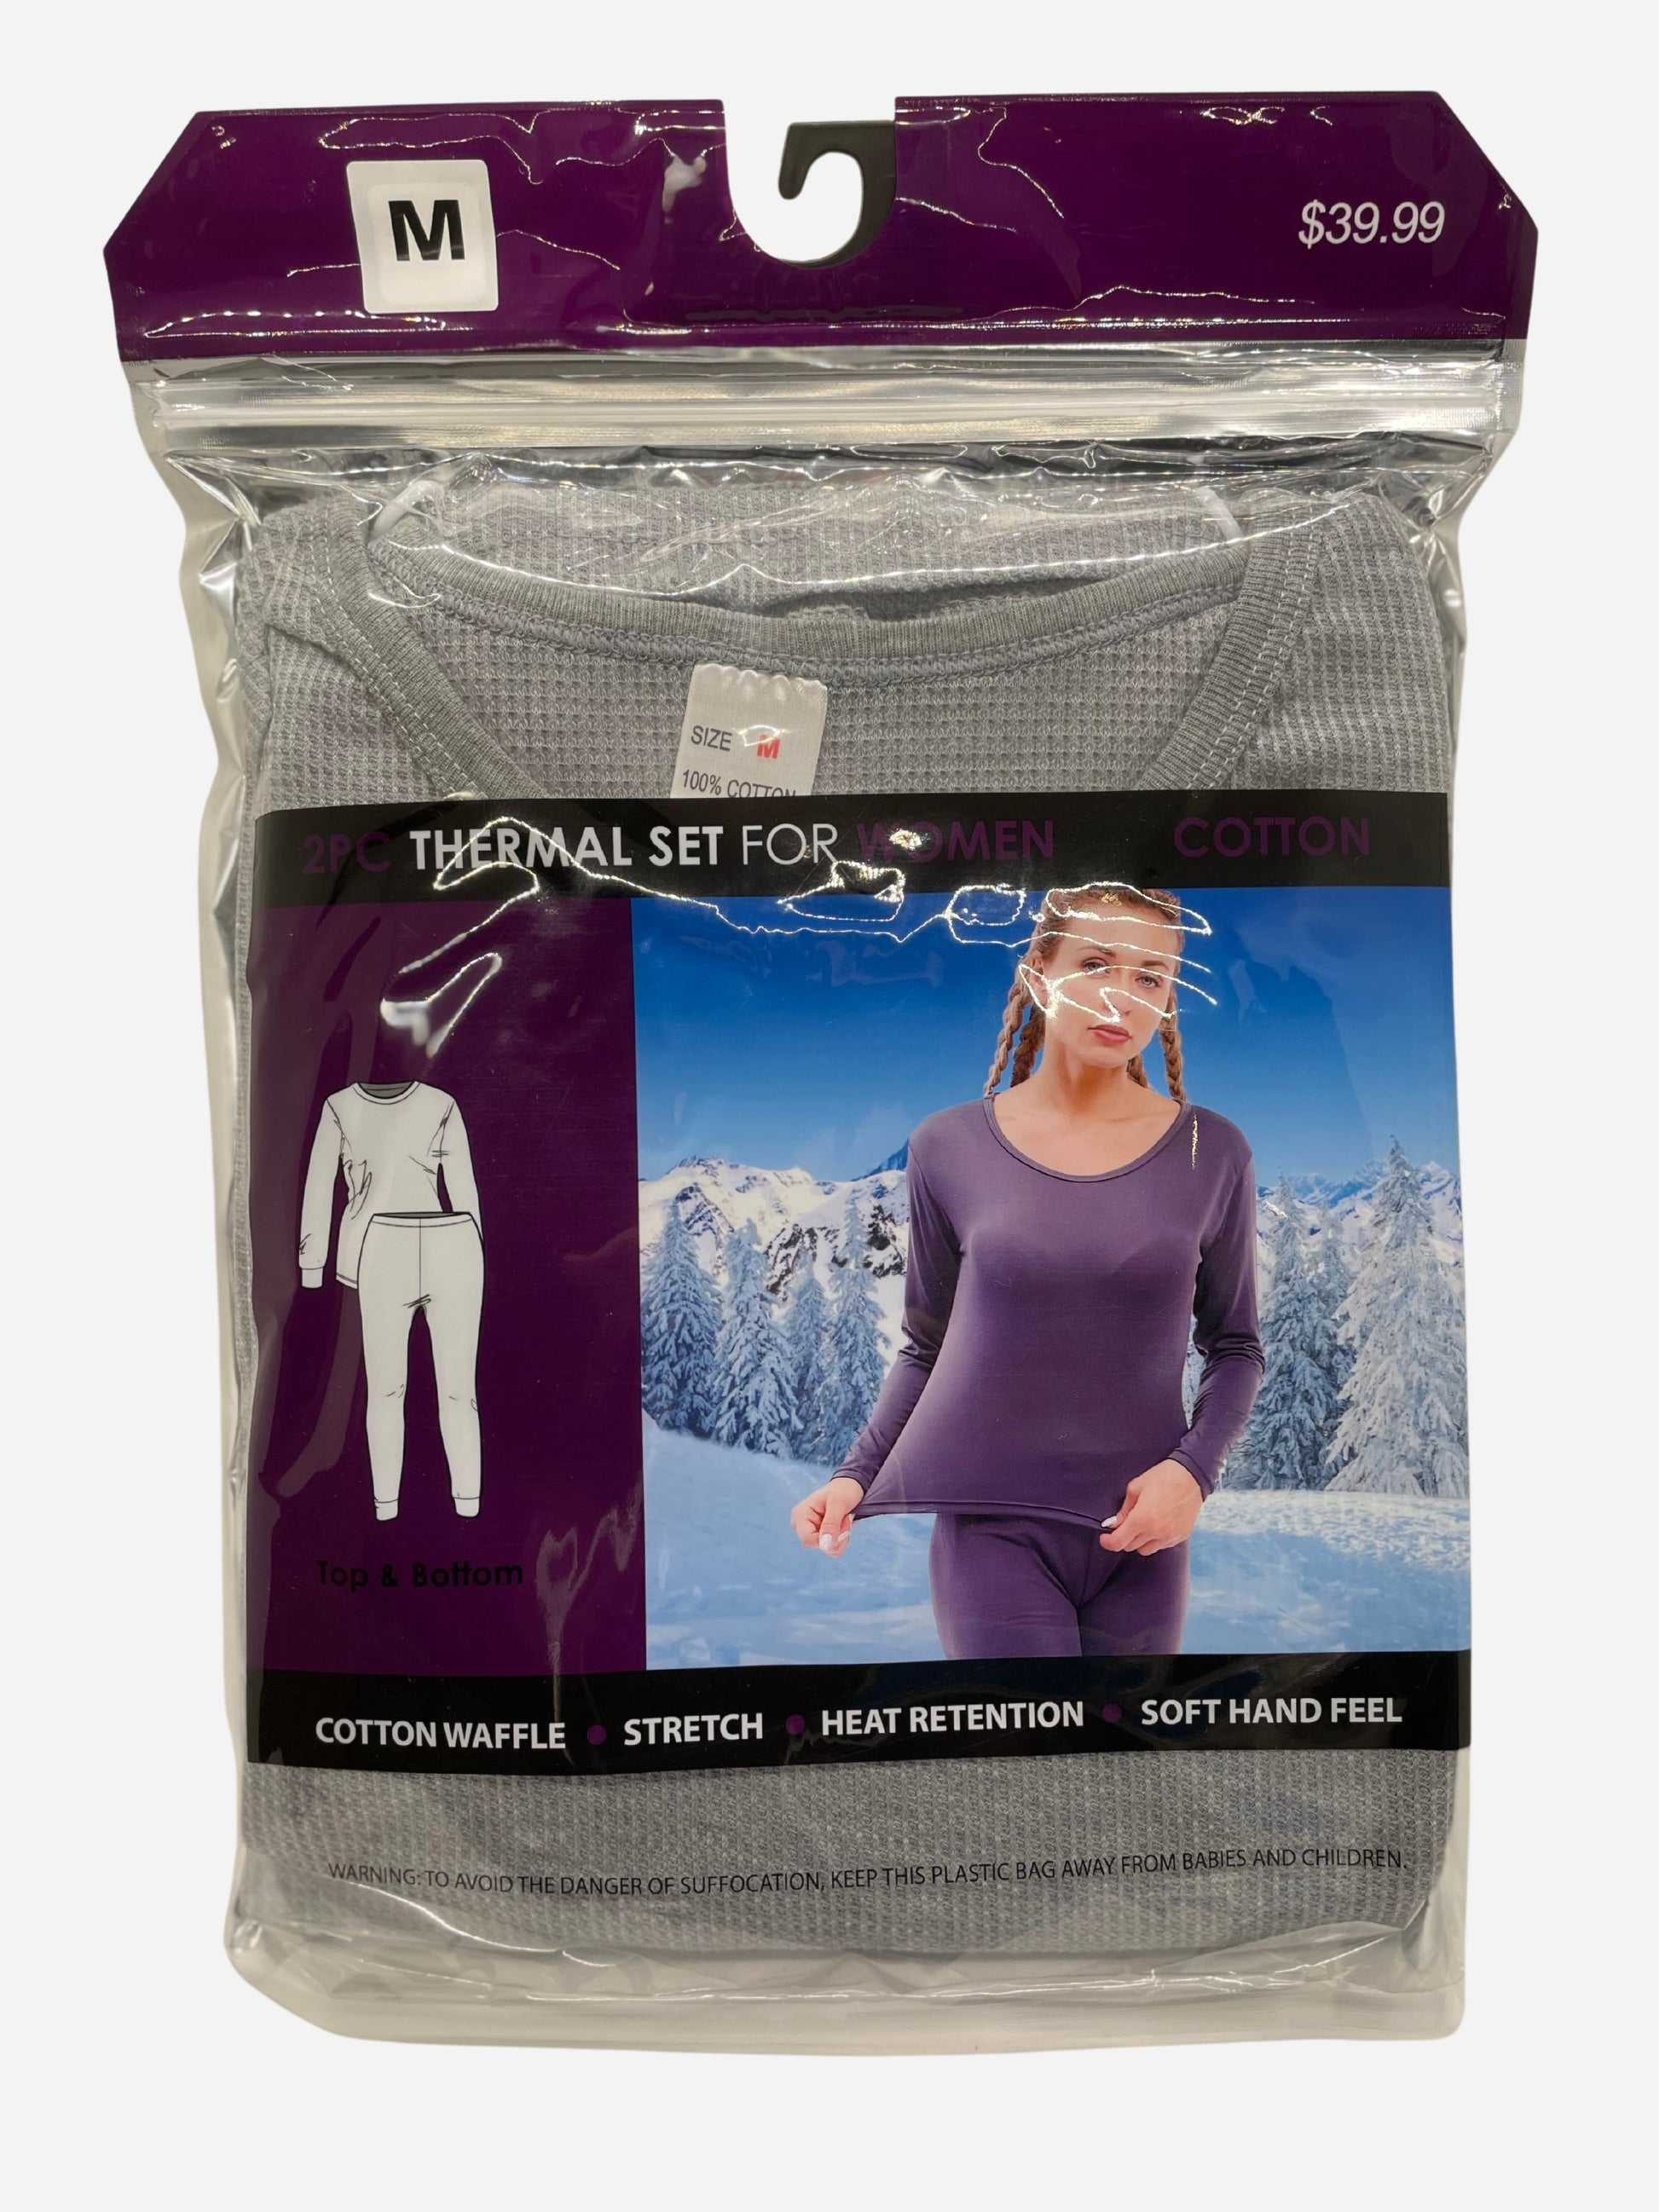 Women's Thermal Underwear - Affordable Prices, Fast Shipping